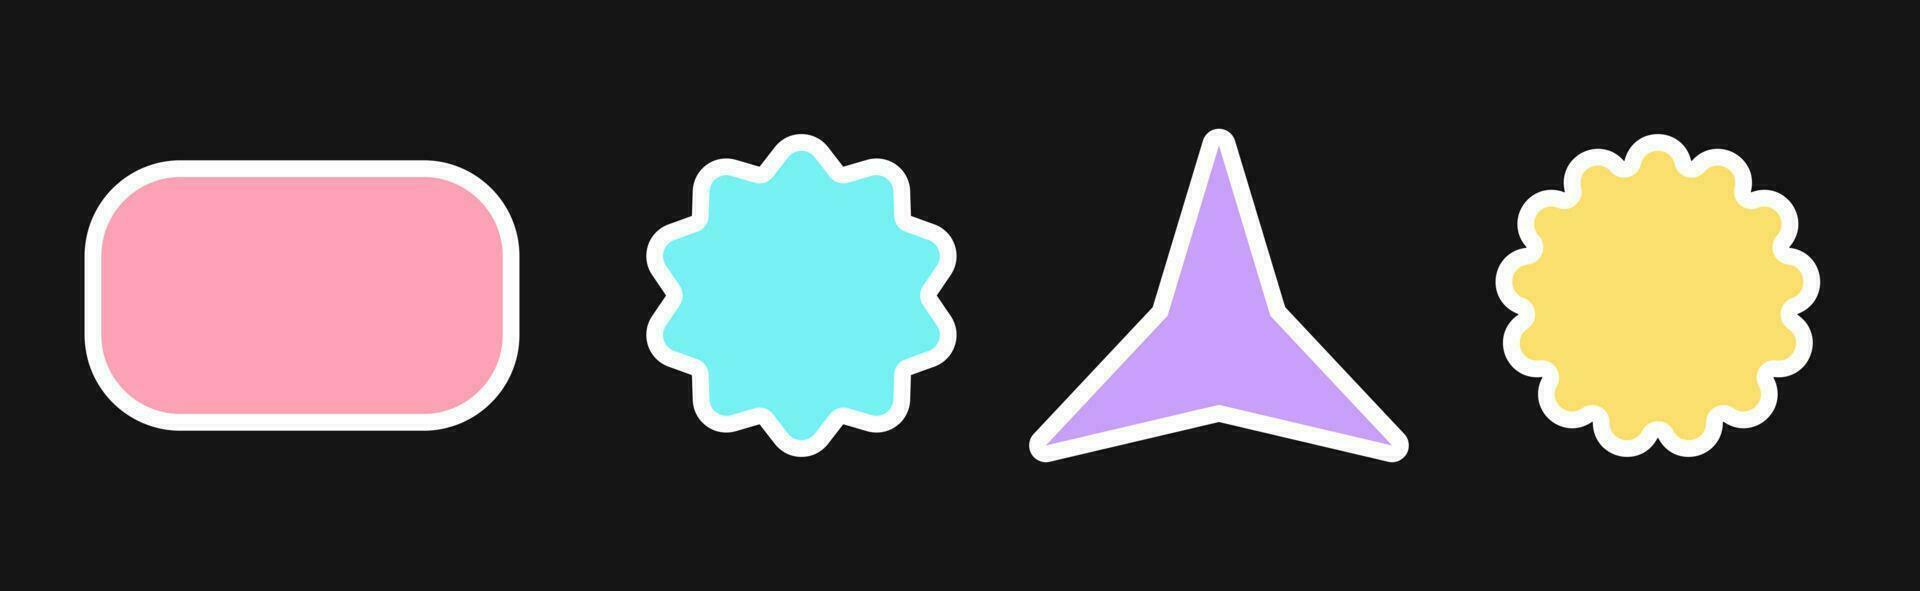 Set of 4 stickers and patches with copy space in retro pop style colorful pastel colors with a stroke. Simple isolated vector shapes for promo, packaging, social media posts, printing.